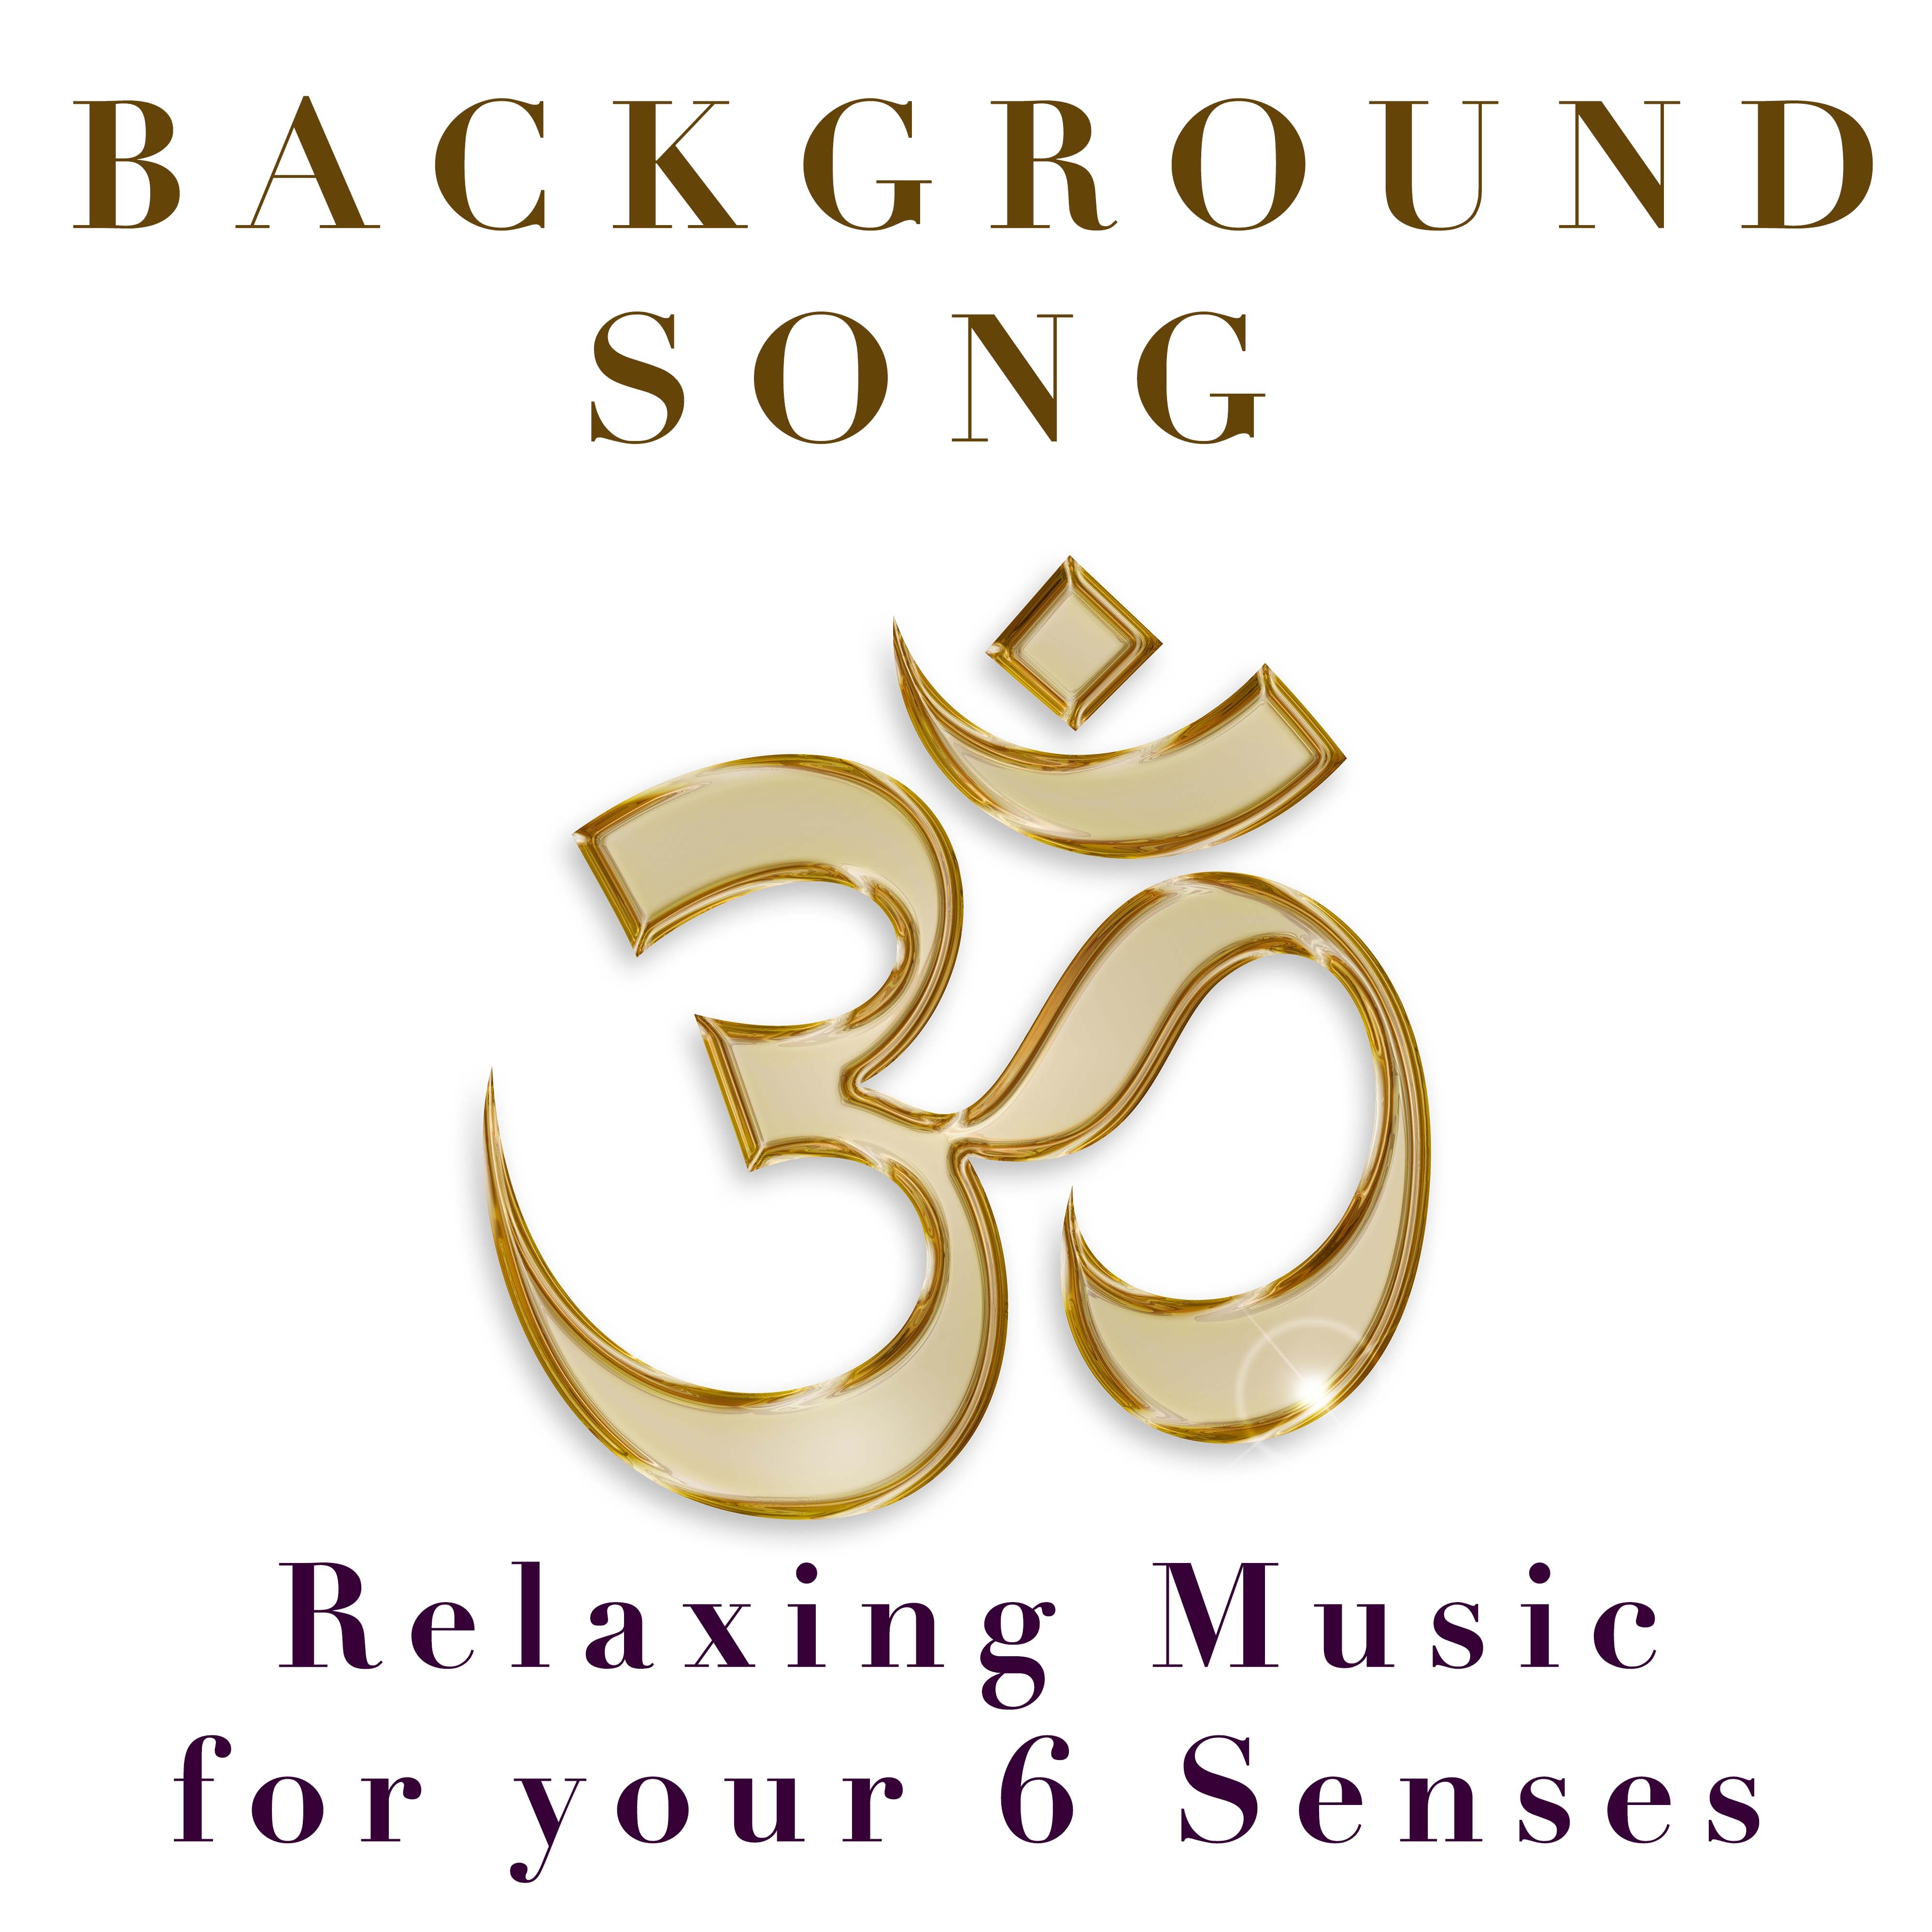 Background Song - Relaxing Music for your 6 Senses